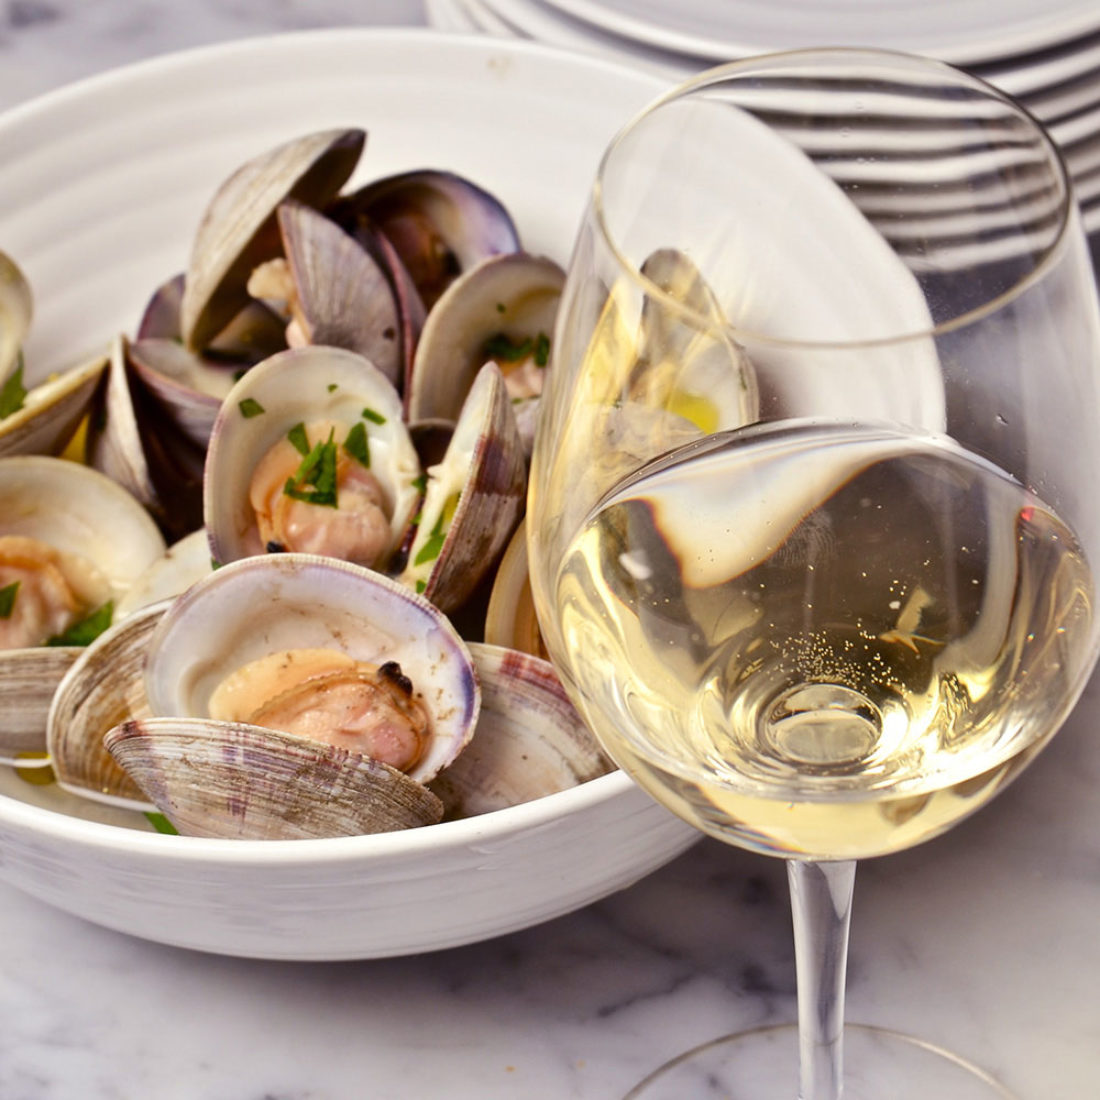 Steamed Clams and Chilled Grillo from Sicilia DOC